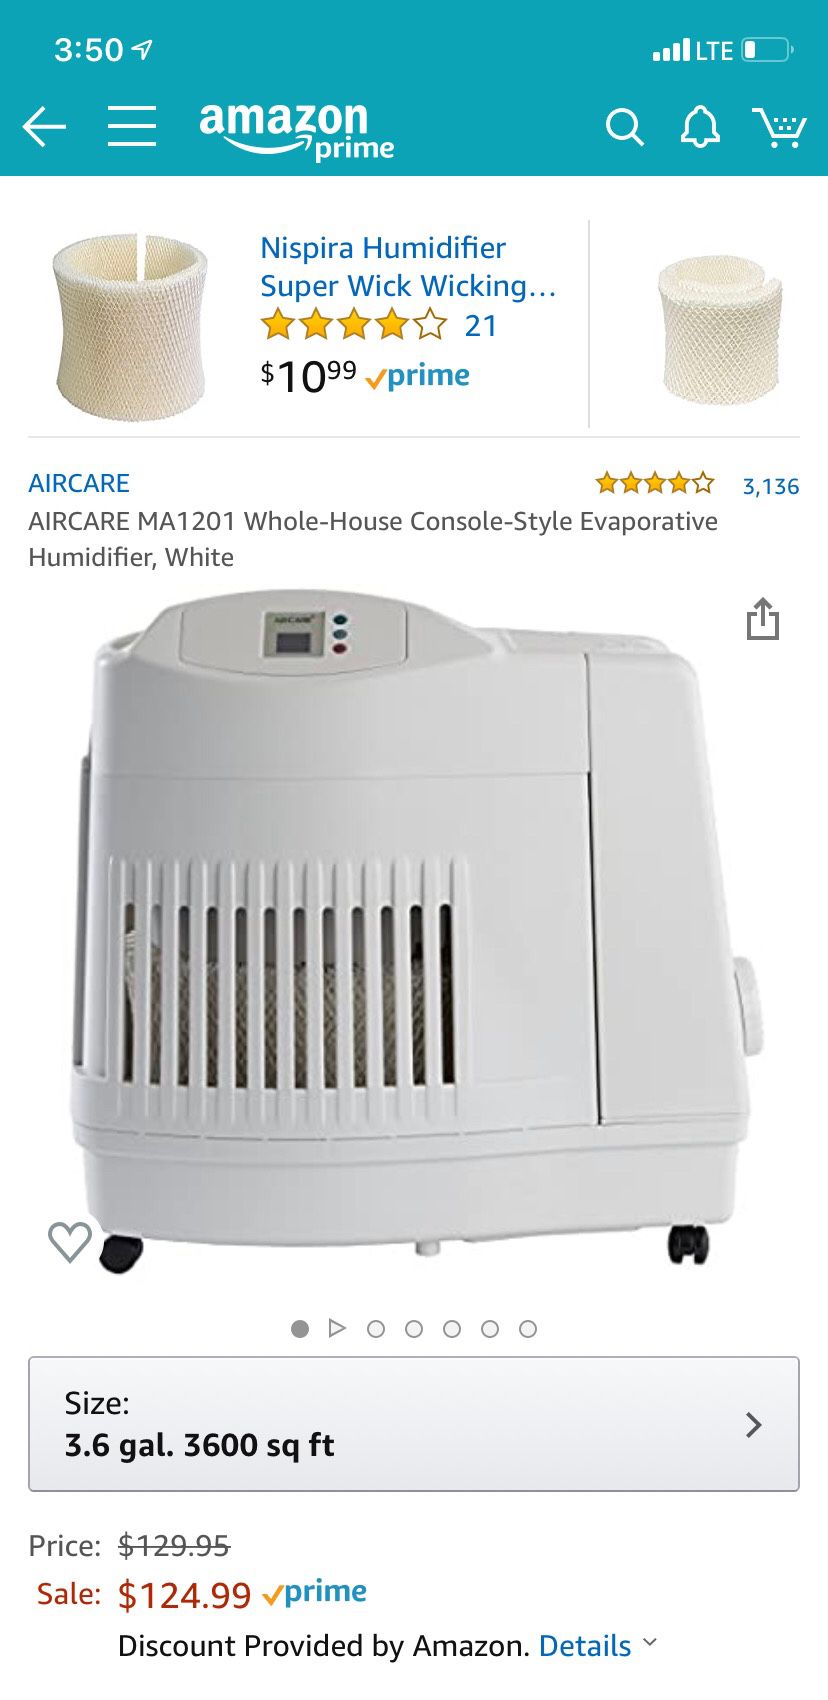 Humidifier AirCare in good condition